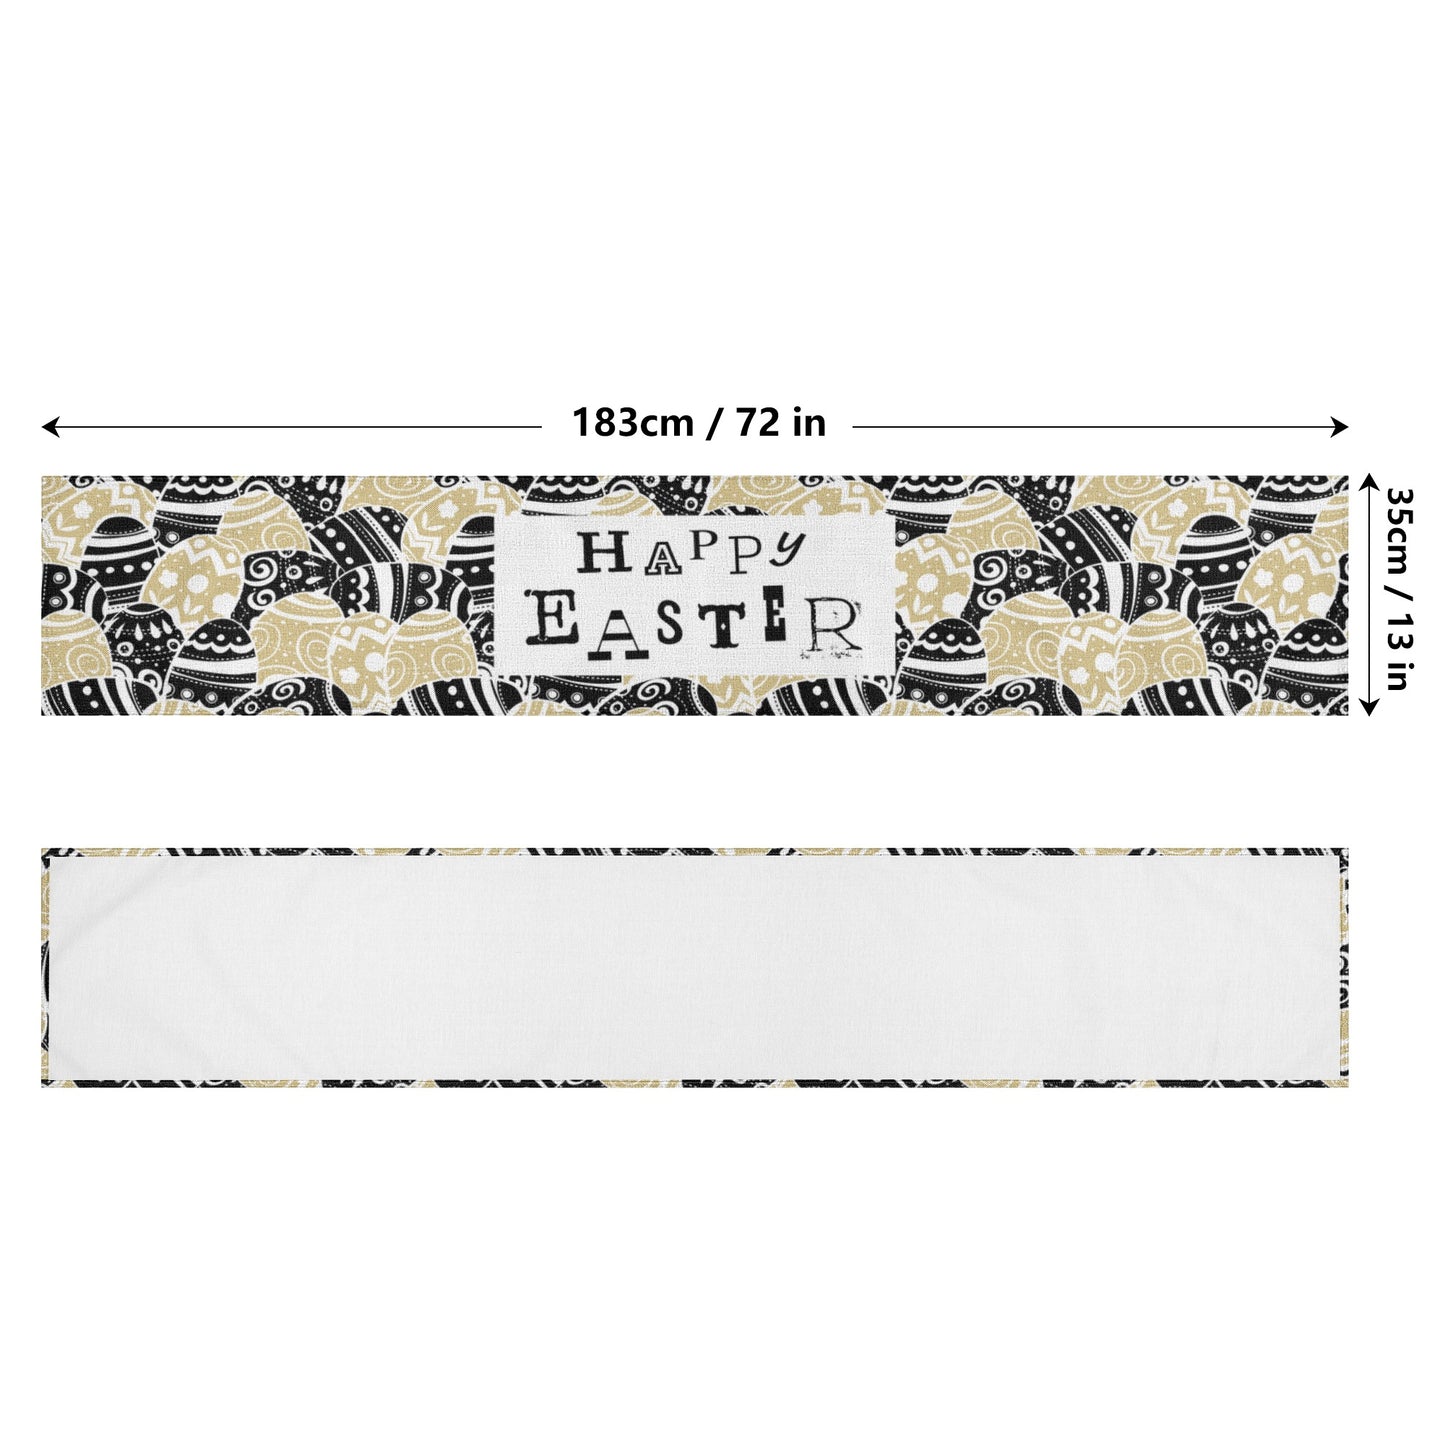 Class Happy Easter Customized Table Runner To Bring Character and Charm to Any Table